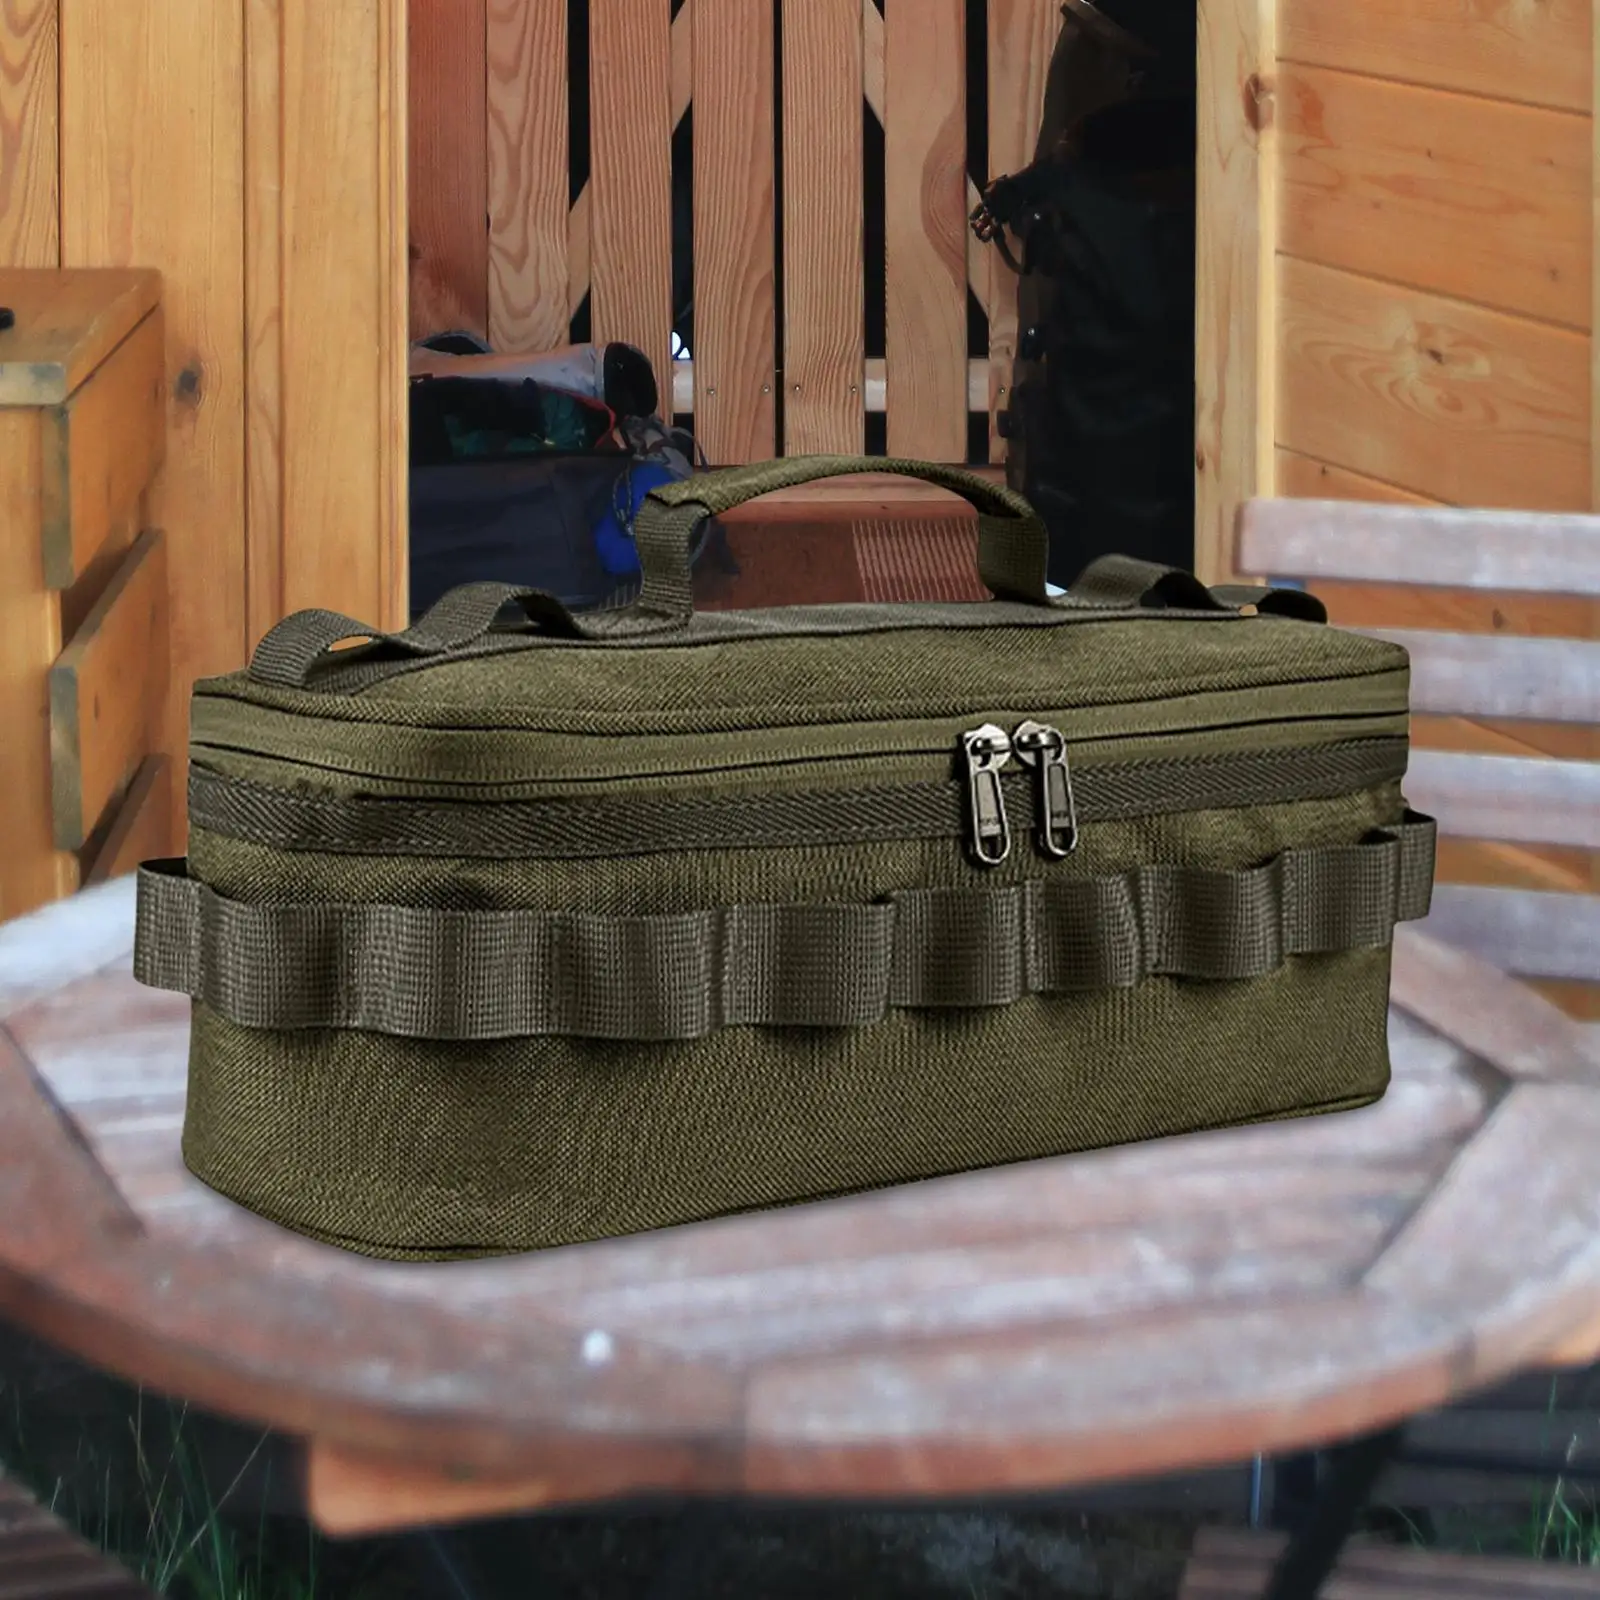 Camping Storage Bag with Handles Durable Tableware Bag Kitchen Cookware Bag for Travel Backpacking Hiking Beach Barbecue